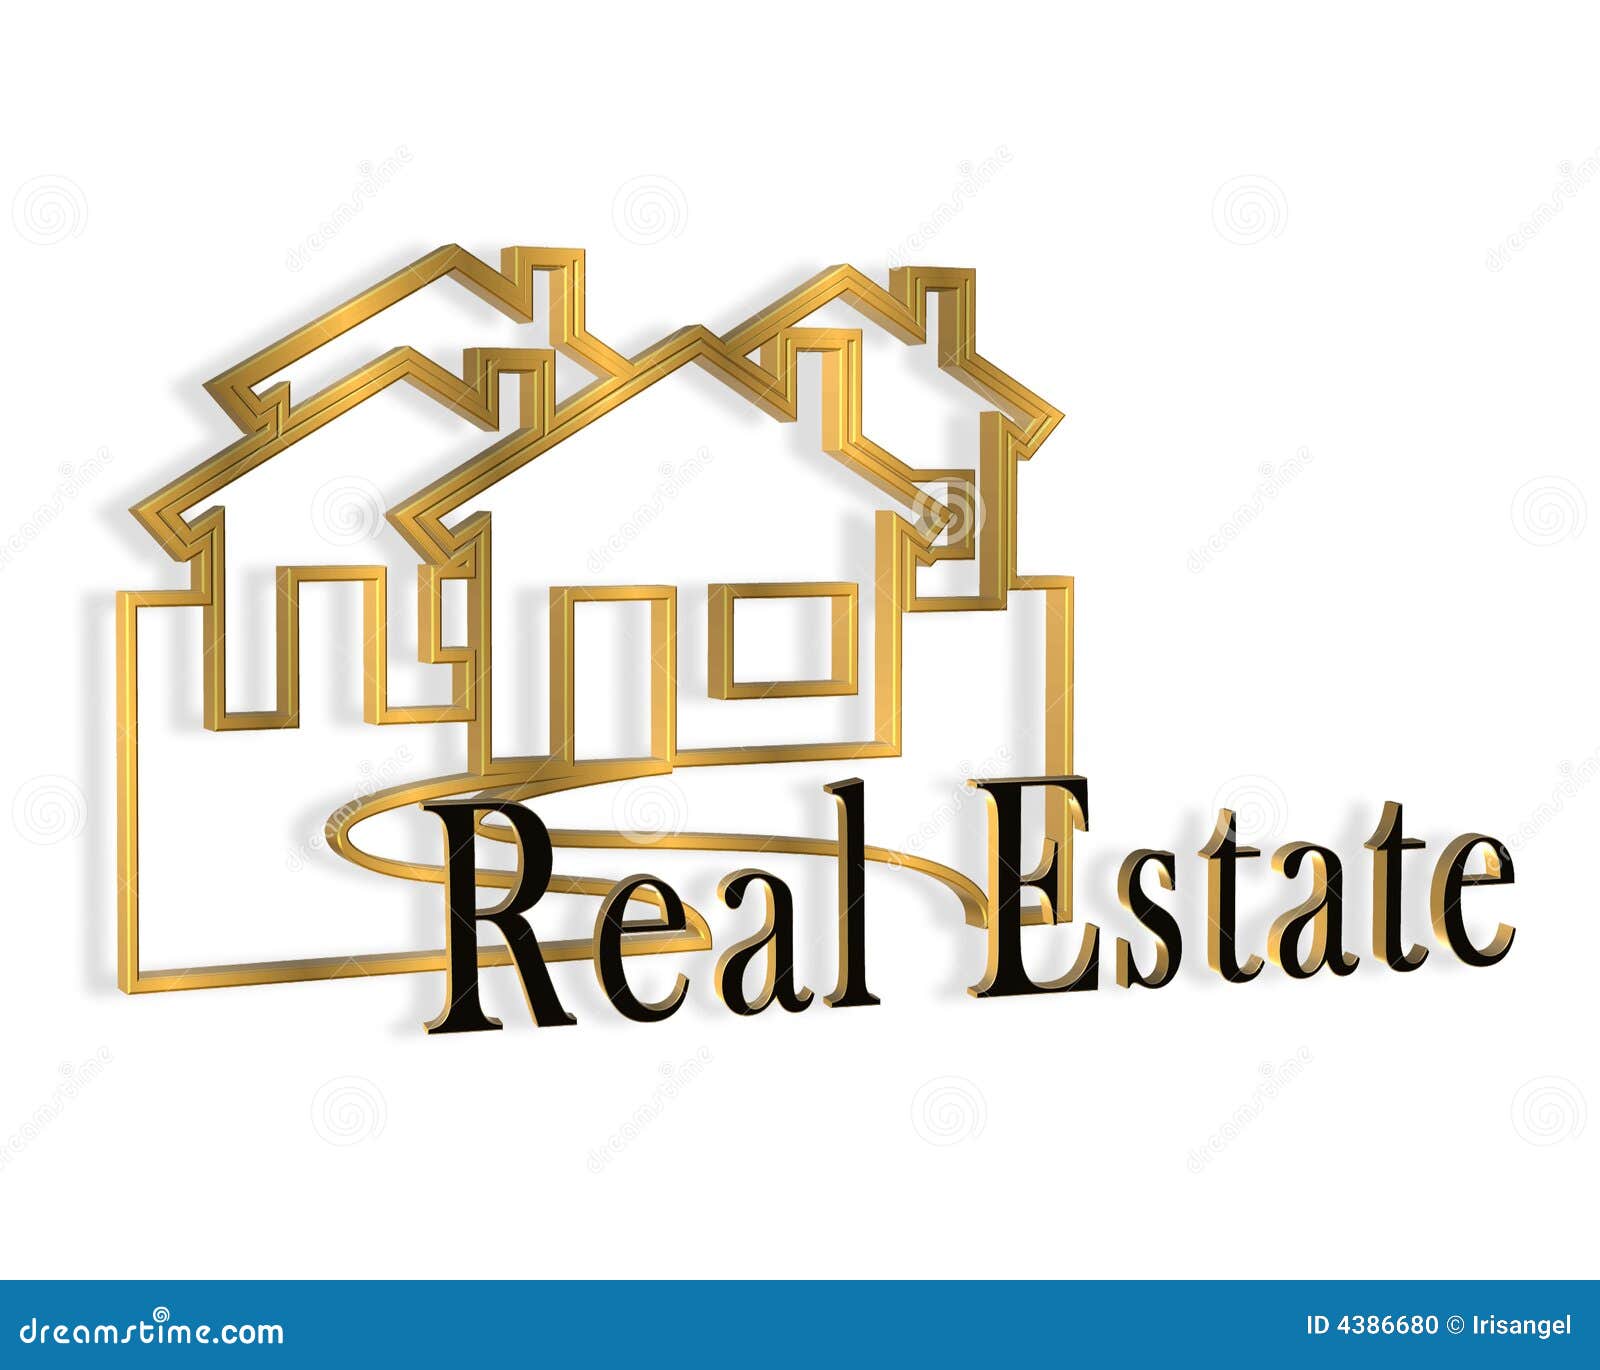 Dimensional Logo for Real Estate business cards or advertisement 